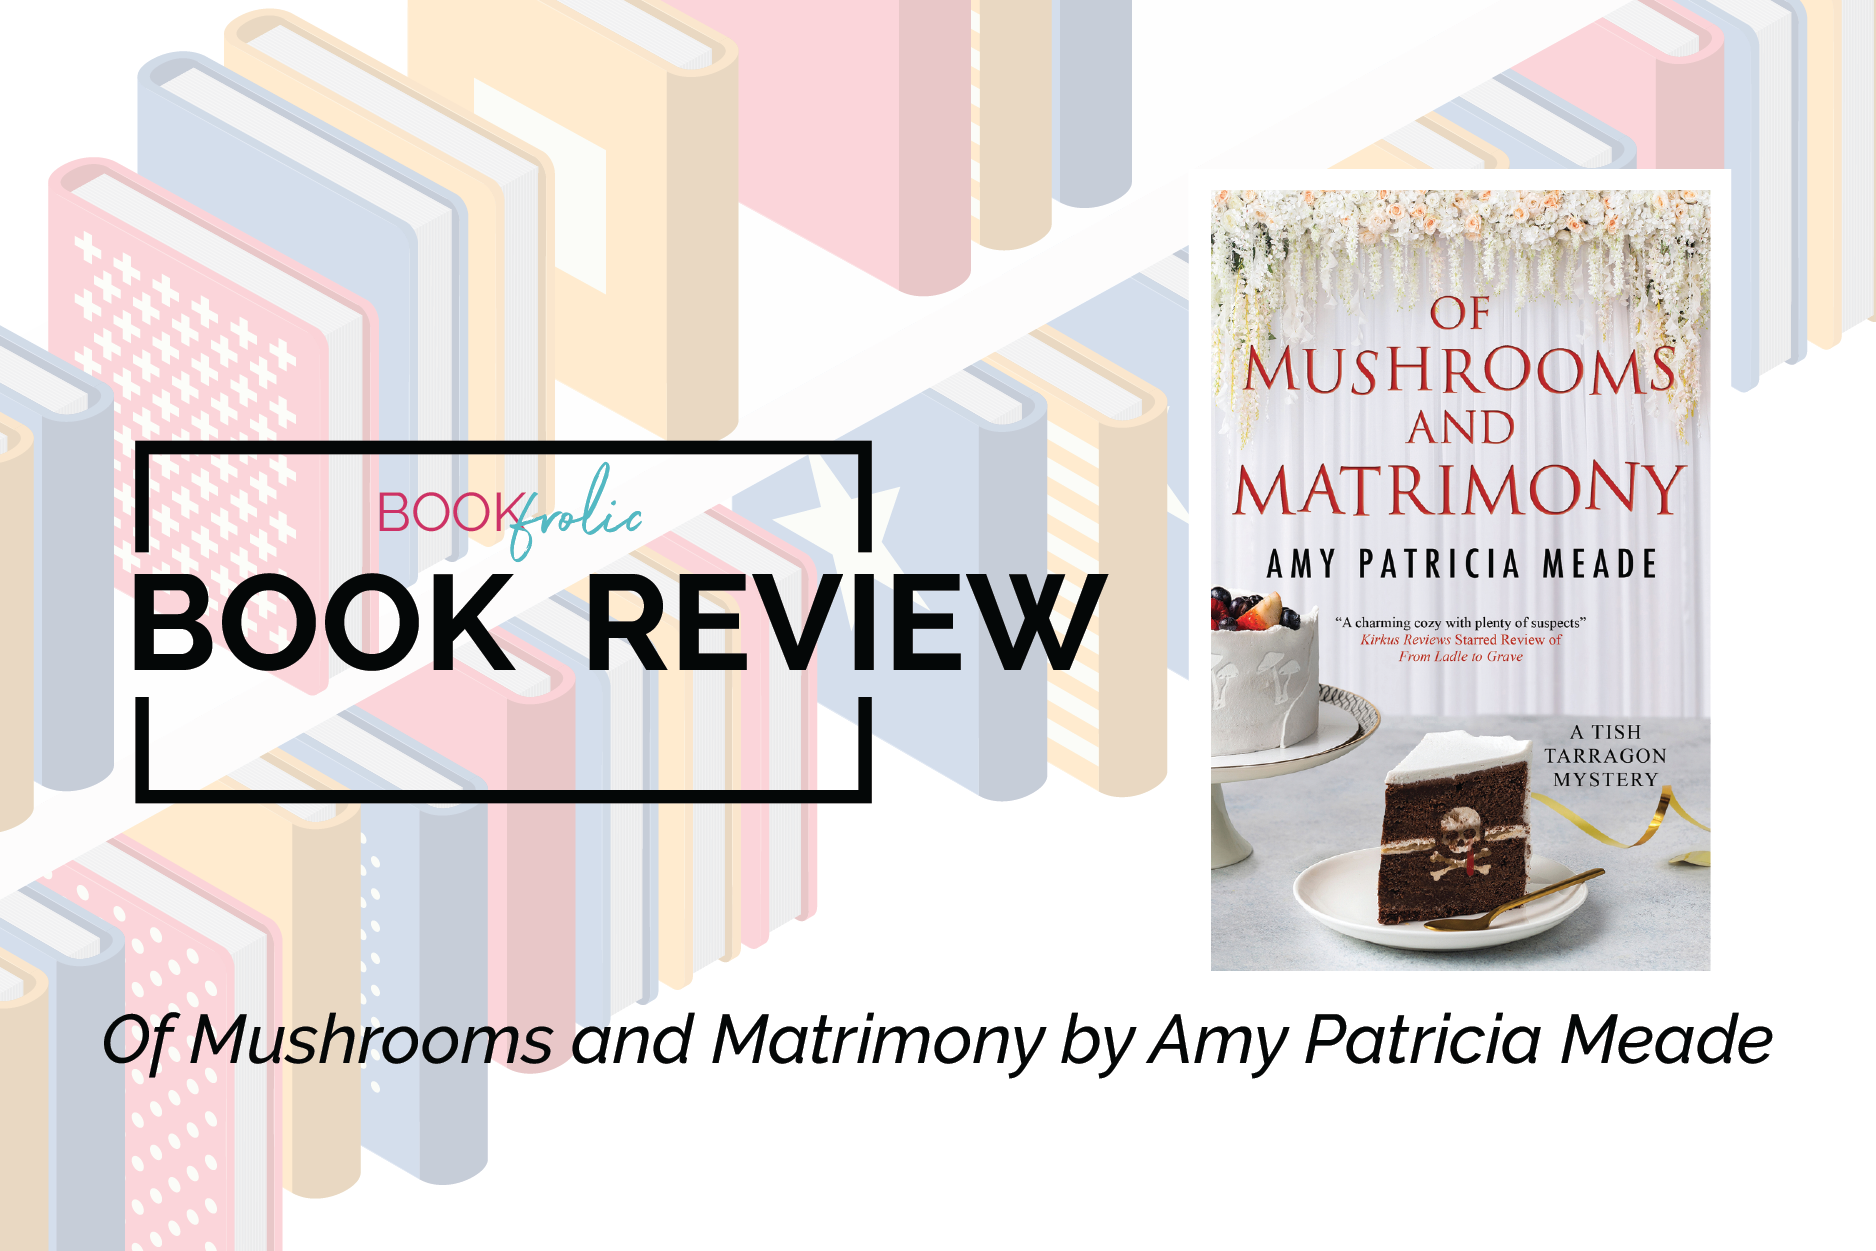 banner for book review of Of Mushrooms and Matrimony by Amy Patricia Meade